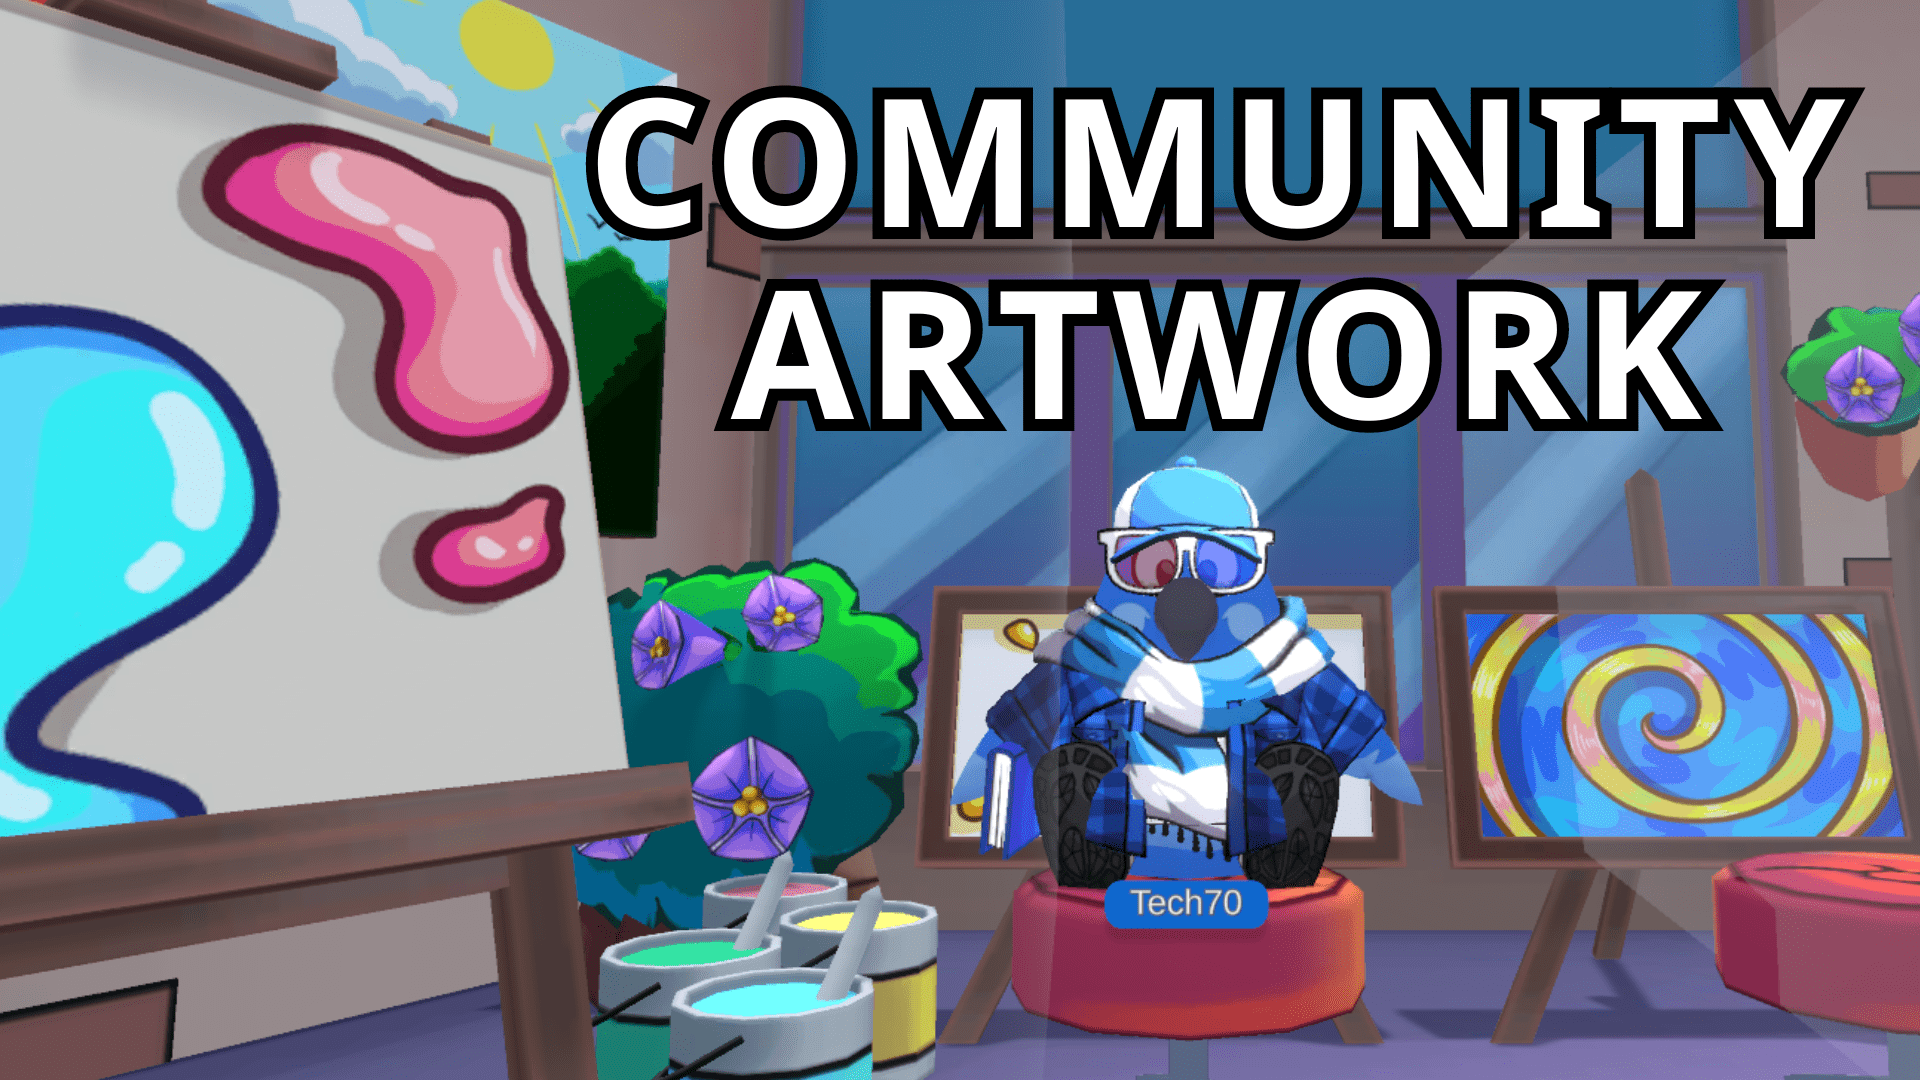 Tech70 in a plaid flannel blue shirt and scarf is sitting in front of a few colorful paintings in the Party Parrot World Art Studio. Text says "Community Artwork". This introduces our community artwork gallery post!